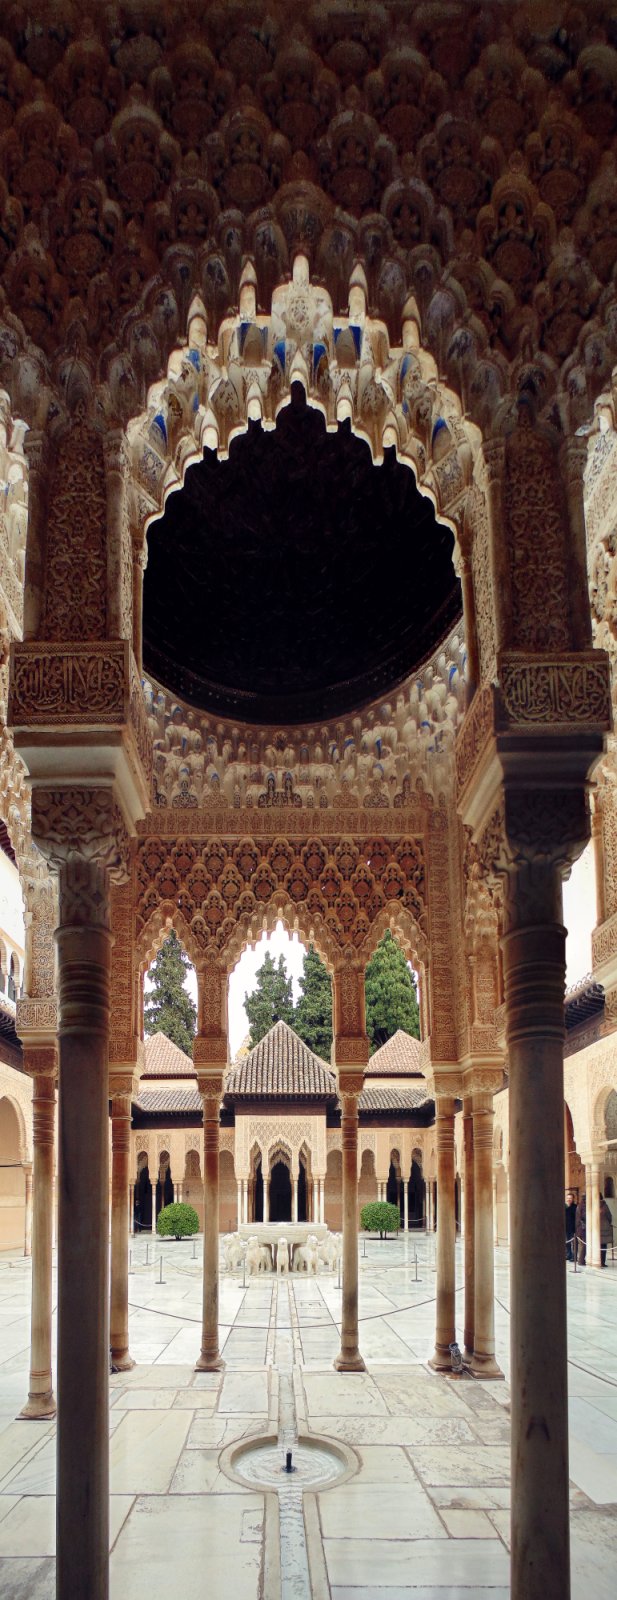 Gateway to the Alhambra